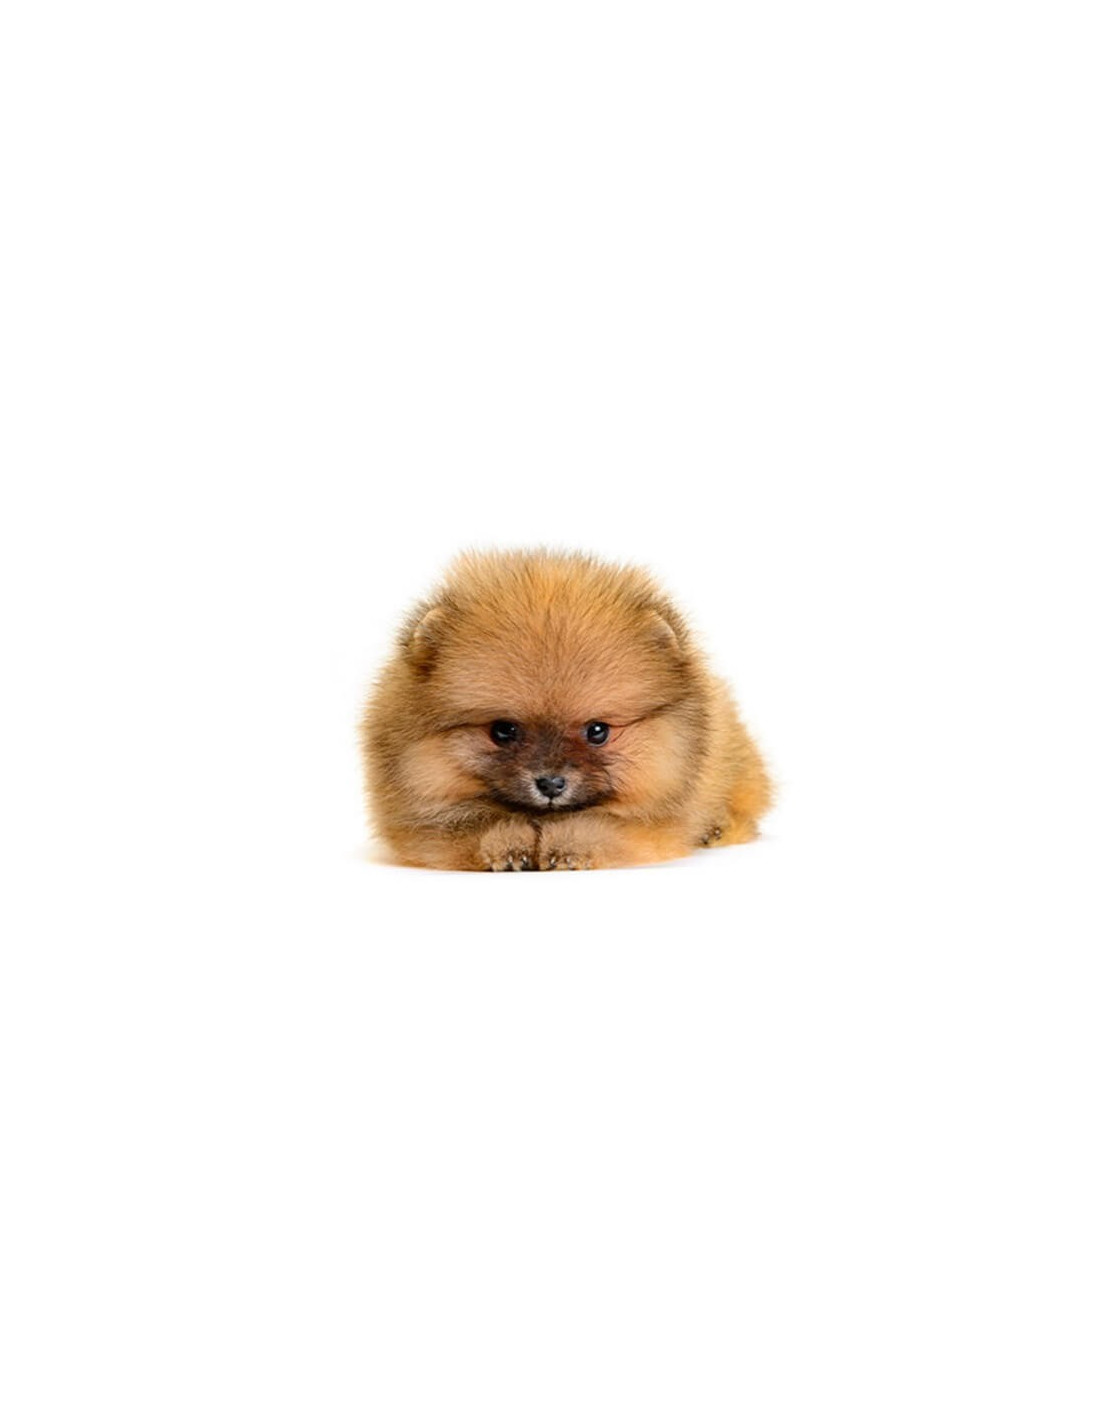 Mini Pomeranian Puppies For Sale with best price in India. Gender Male